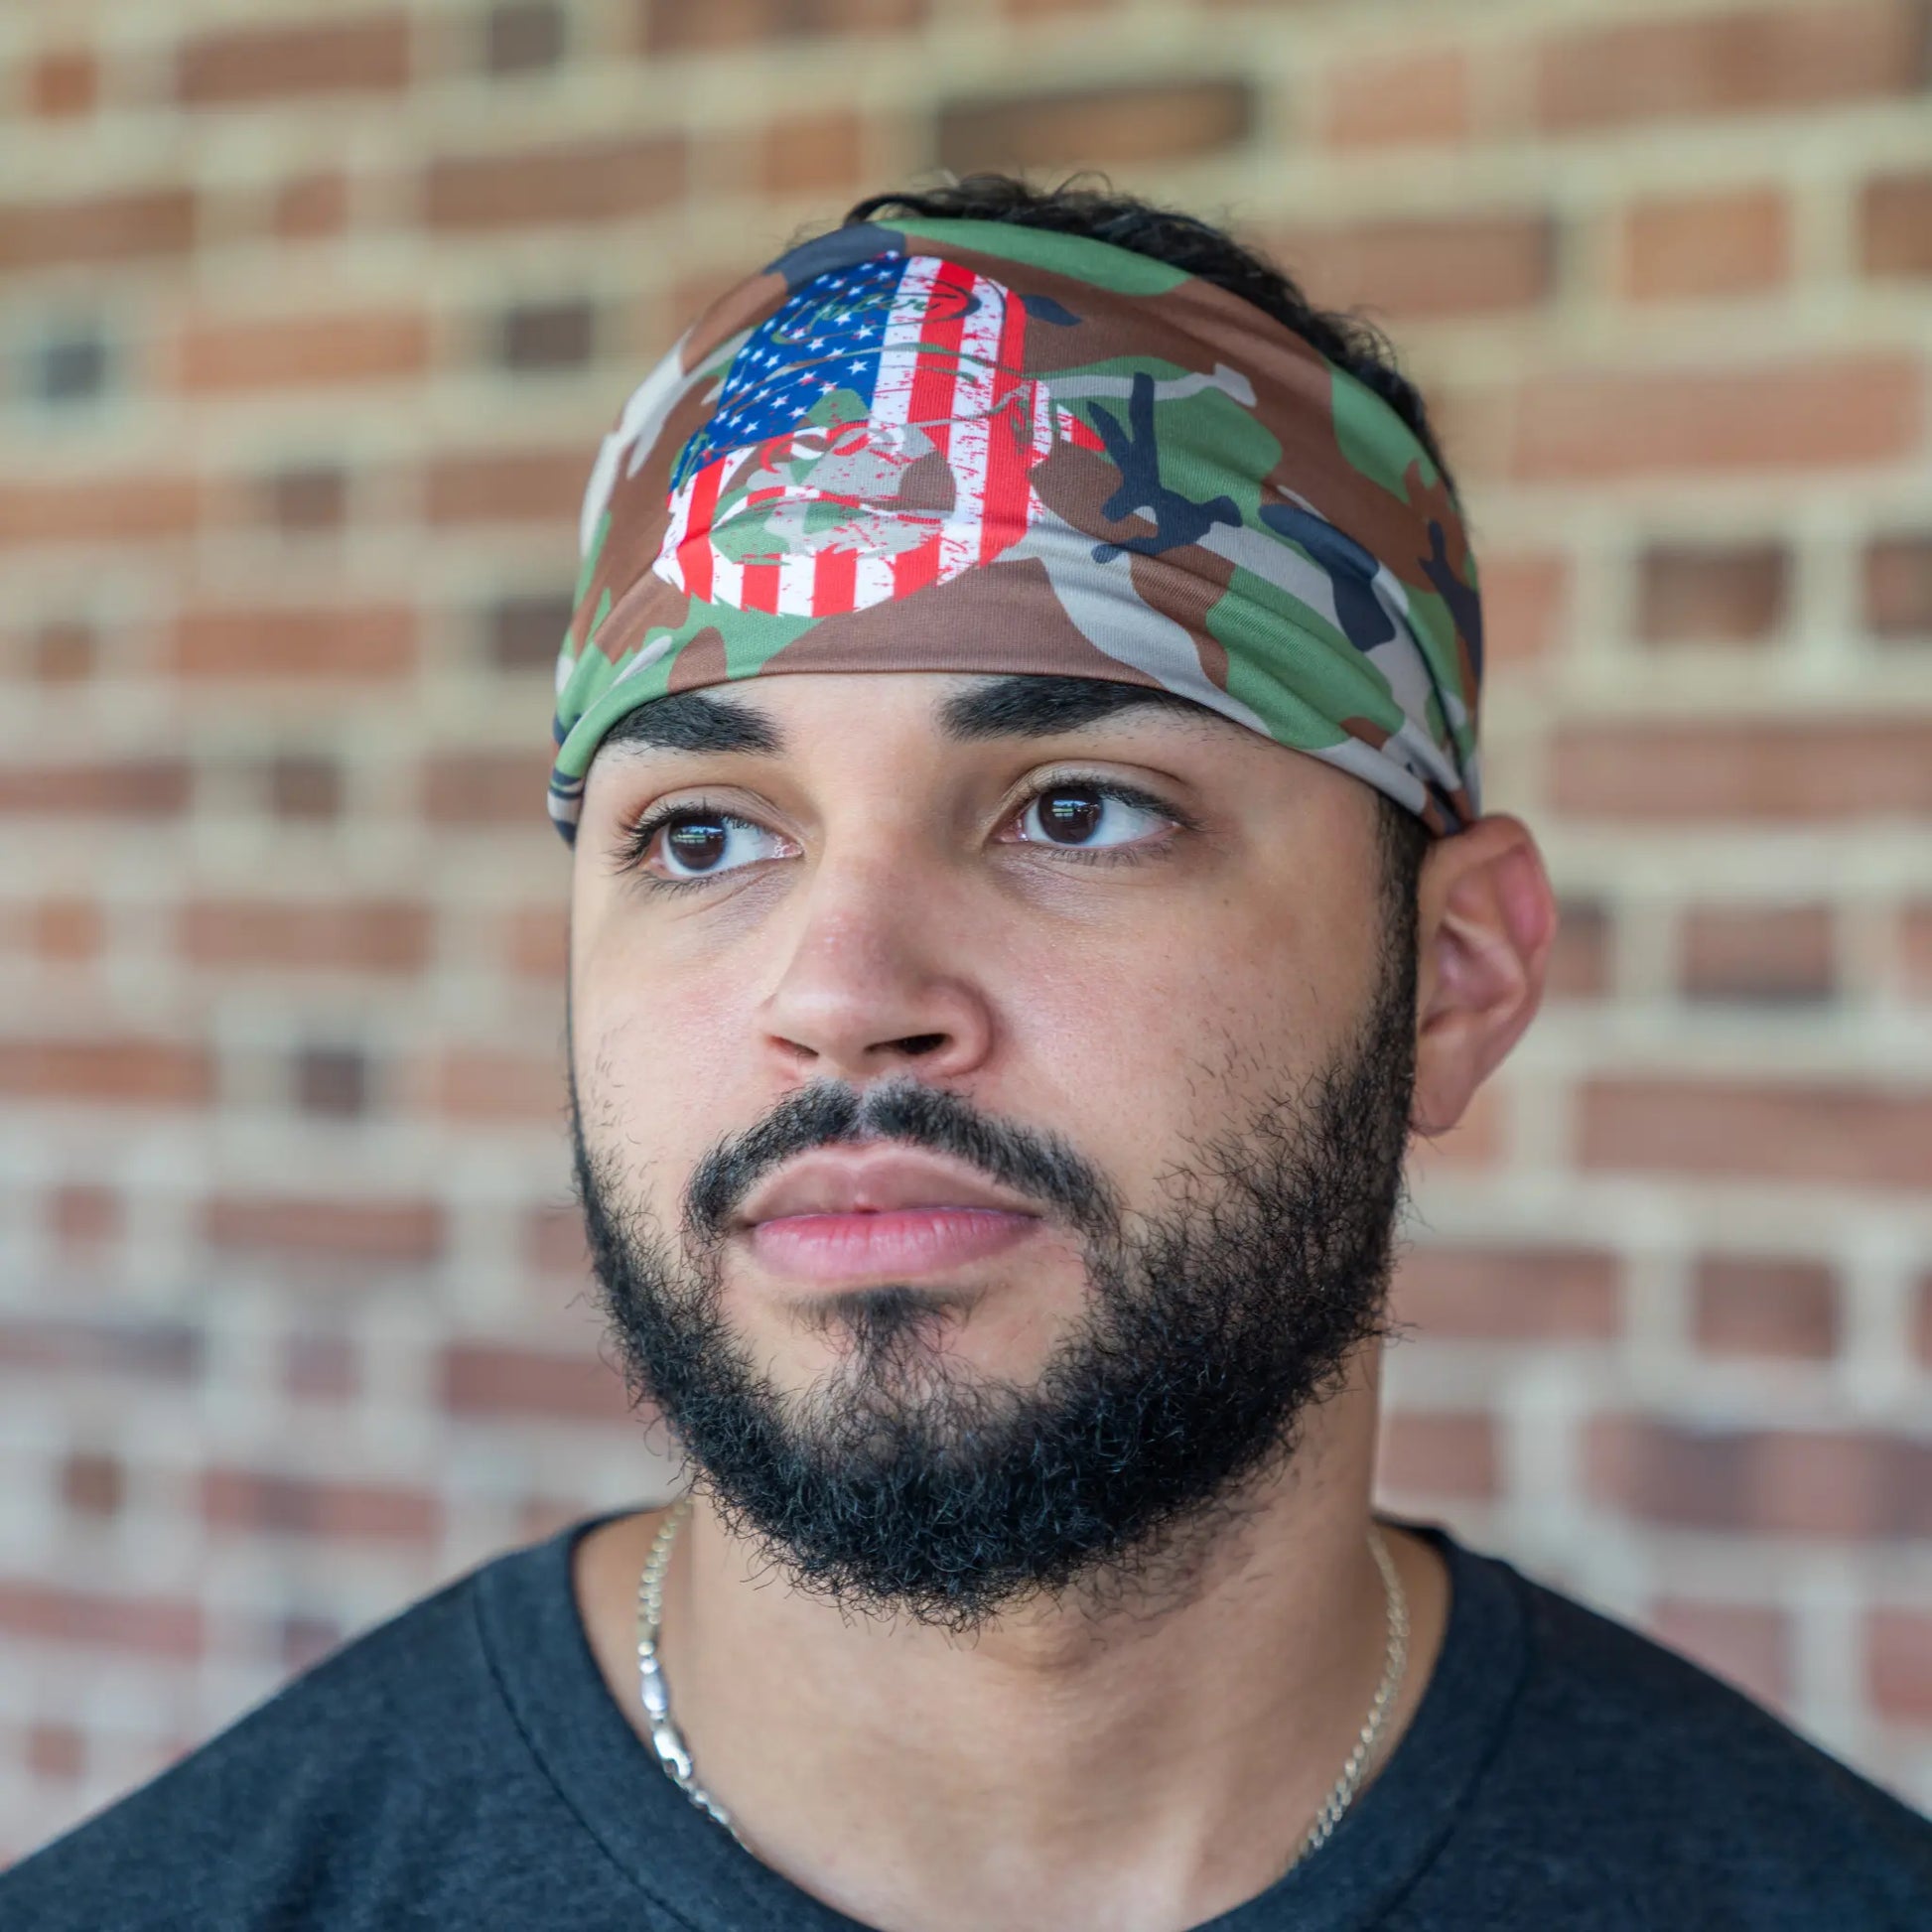 Focused baseball player wearing Tater Baseball's camo workout headband adorned with the American flag, blending athletic function with national pride in a casual setting.